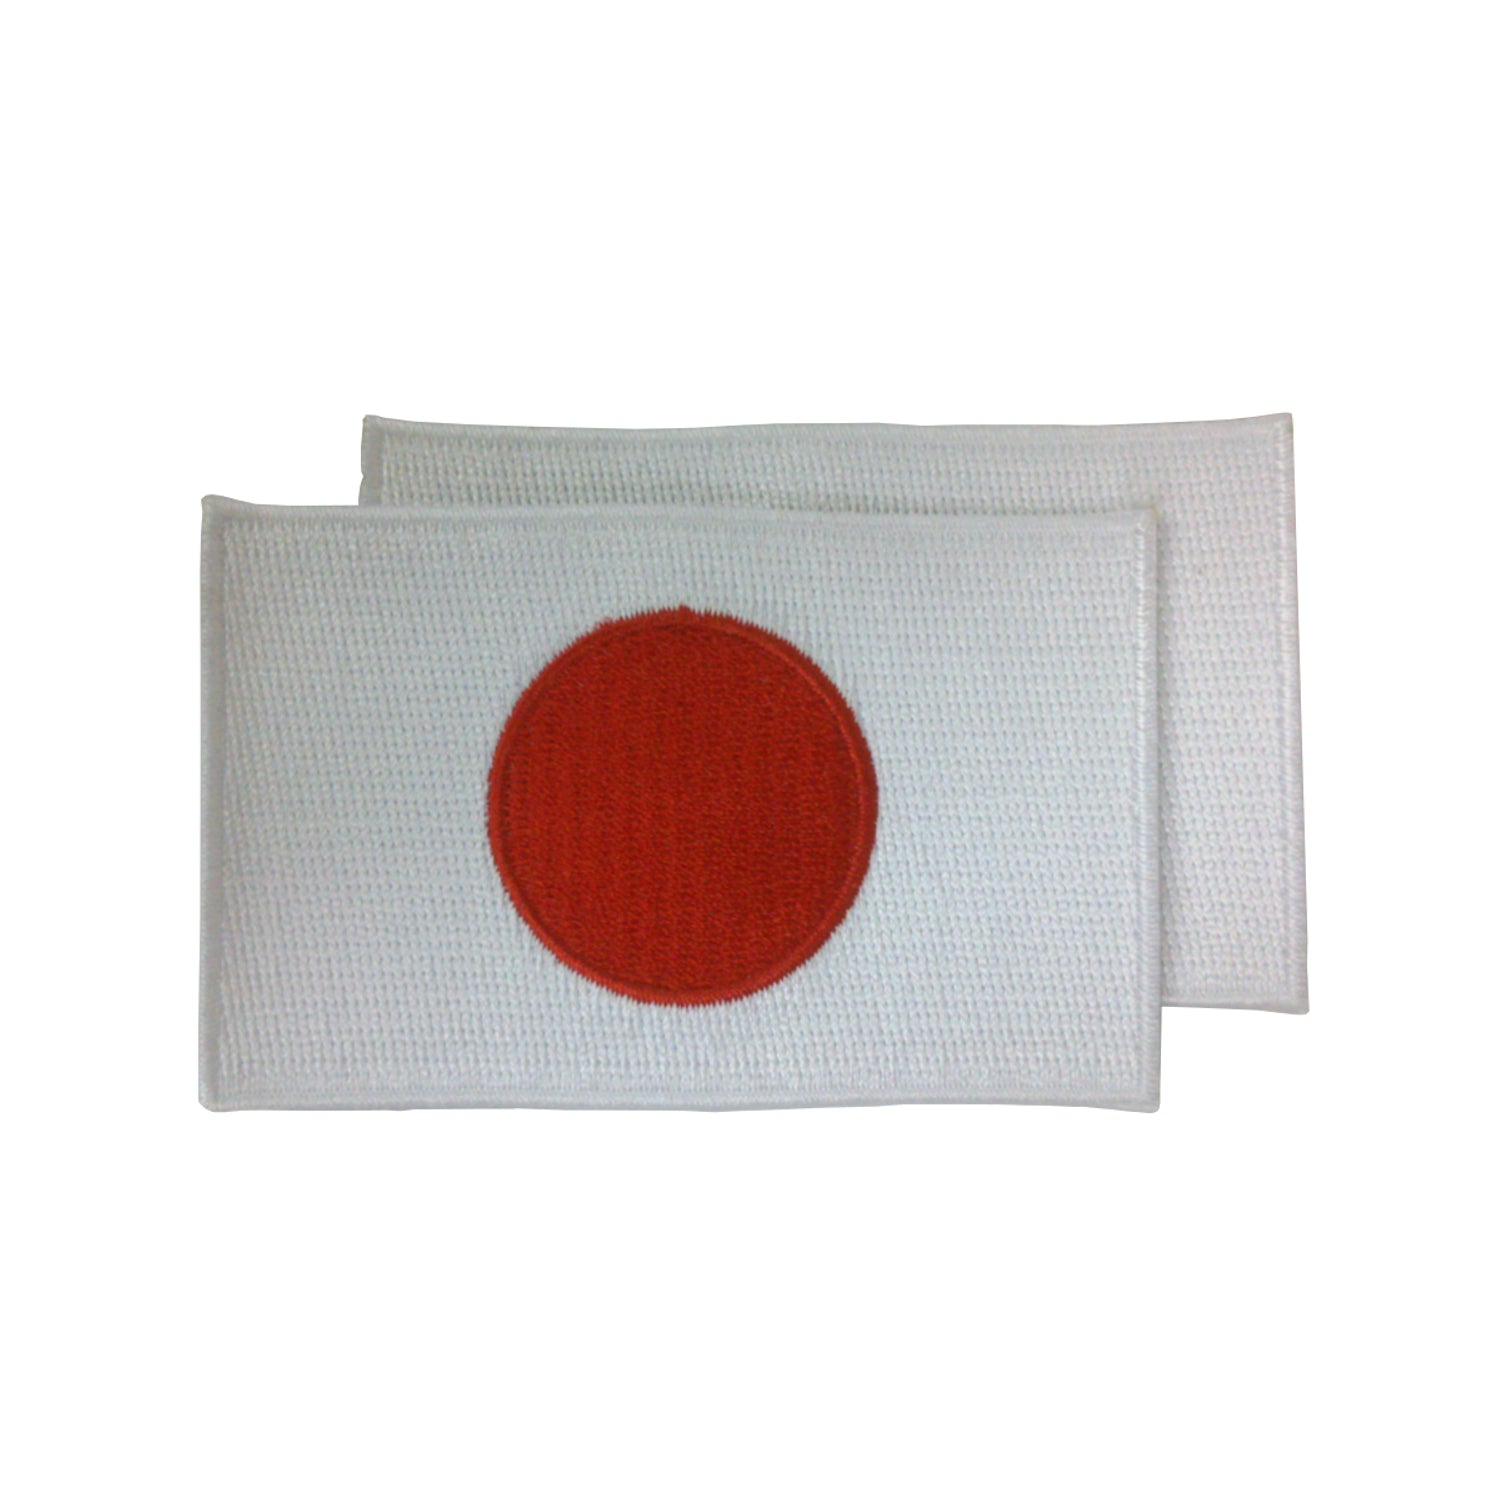 Japan Patches (set of 8)